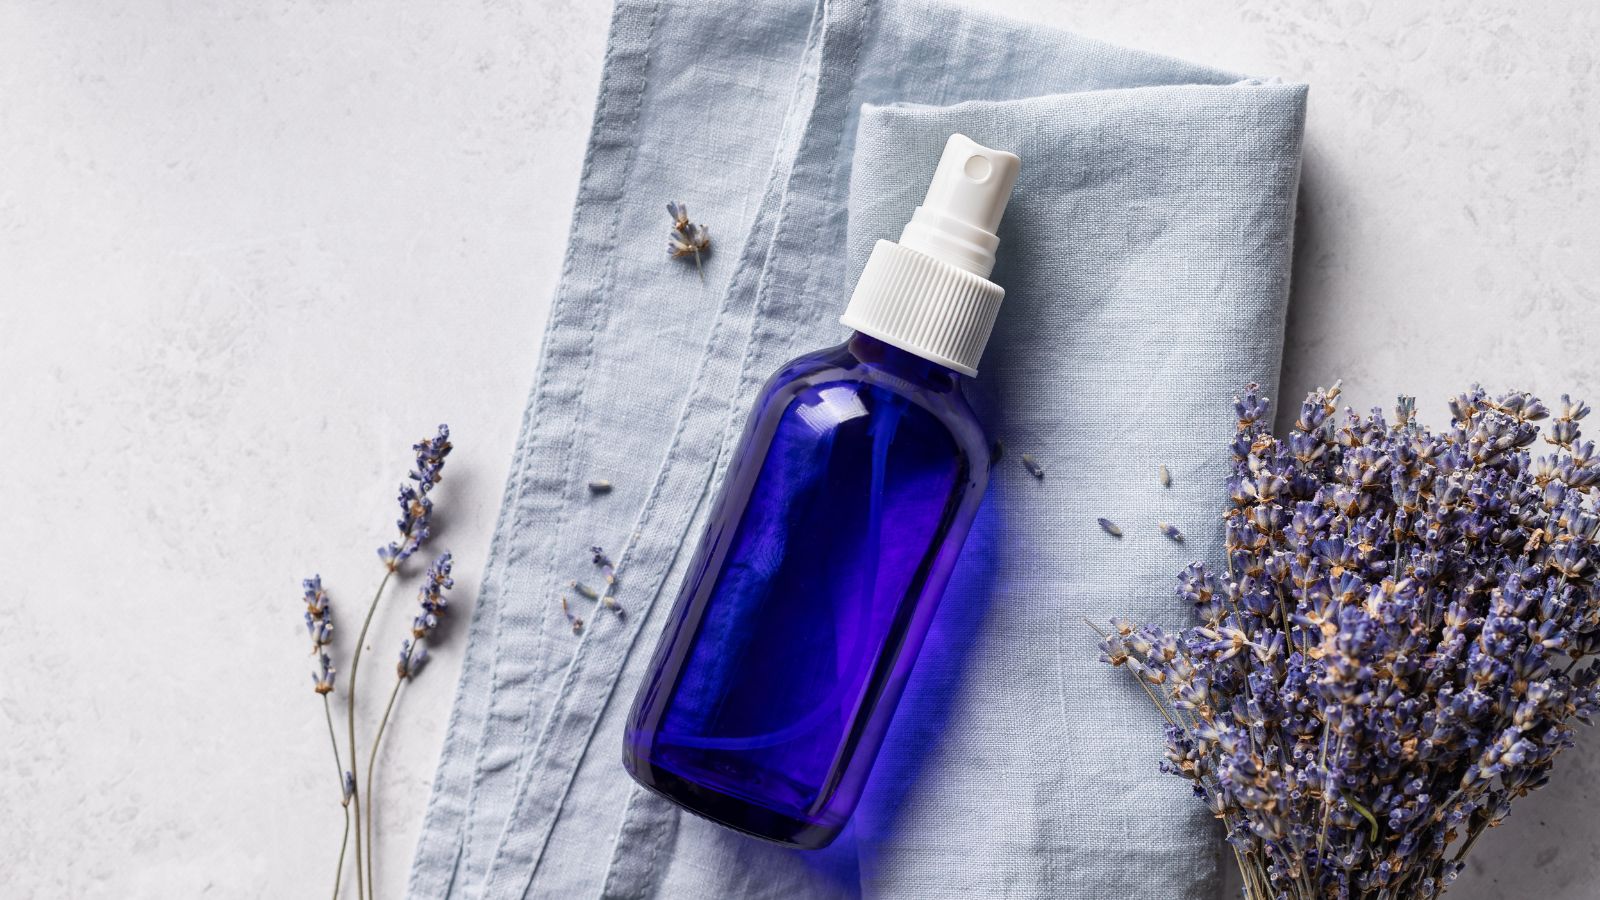 This pillow spray helps me sleep more and wake up refreshed